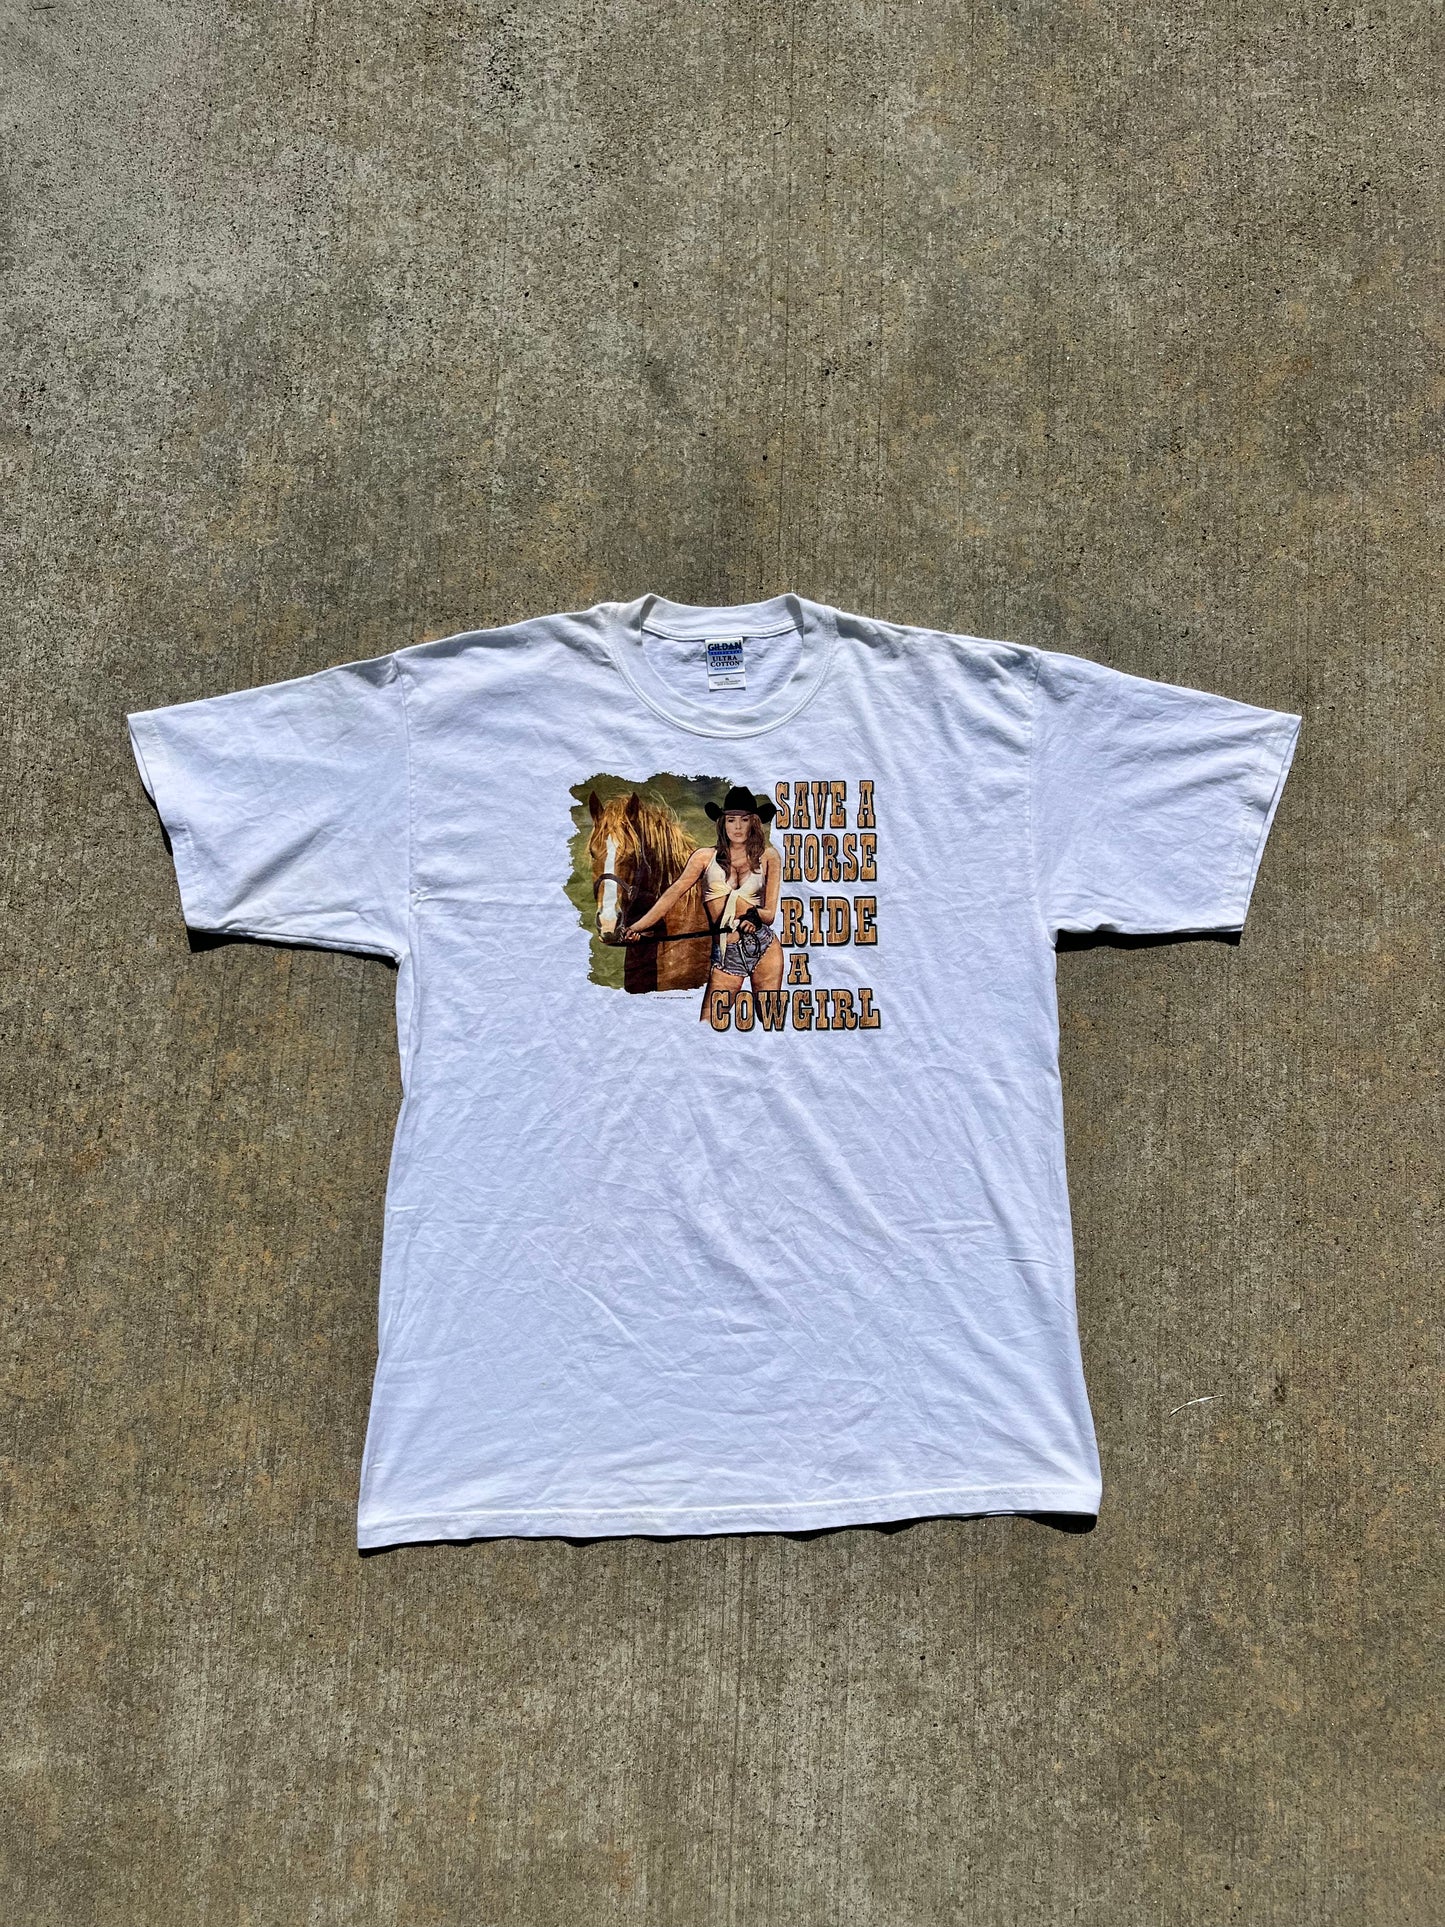 04' Save A Horse Ride A Cowgirl tee